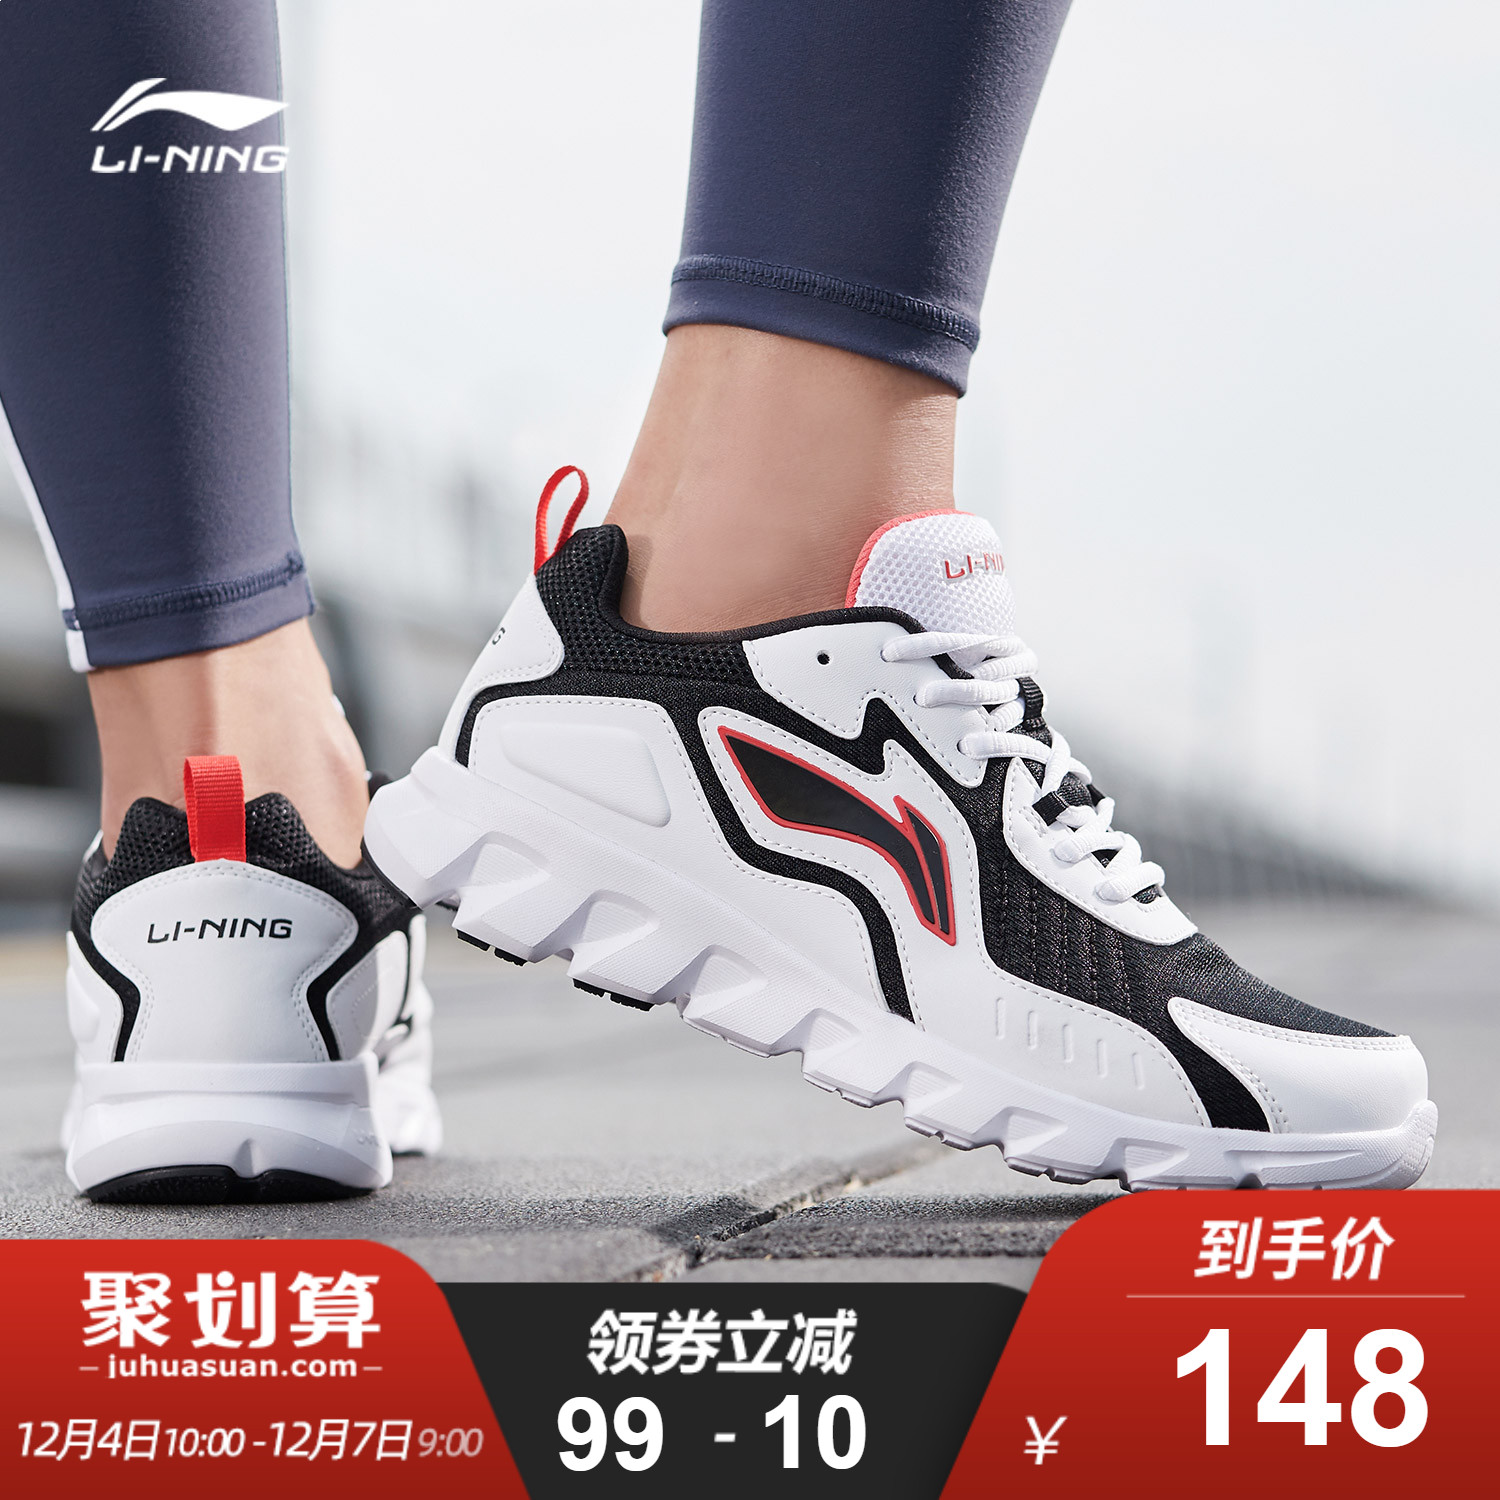 Li Ning Running Shoes Women's Shoes 2019 New Couple Shoes Morning Running Shoes Autumn and Winter Breathable Shock Absorbing Women's Sports Shoes